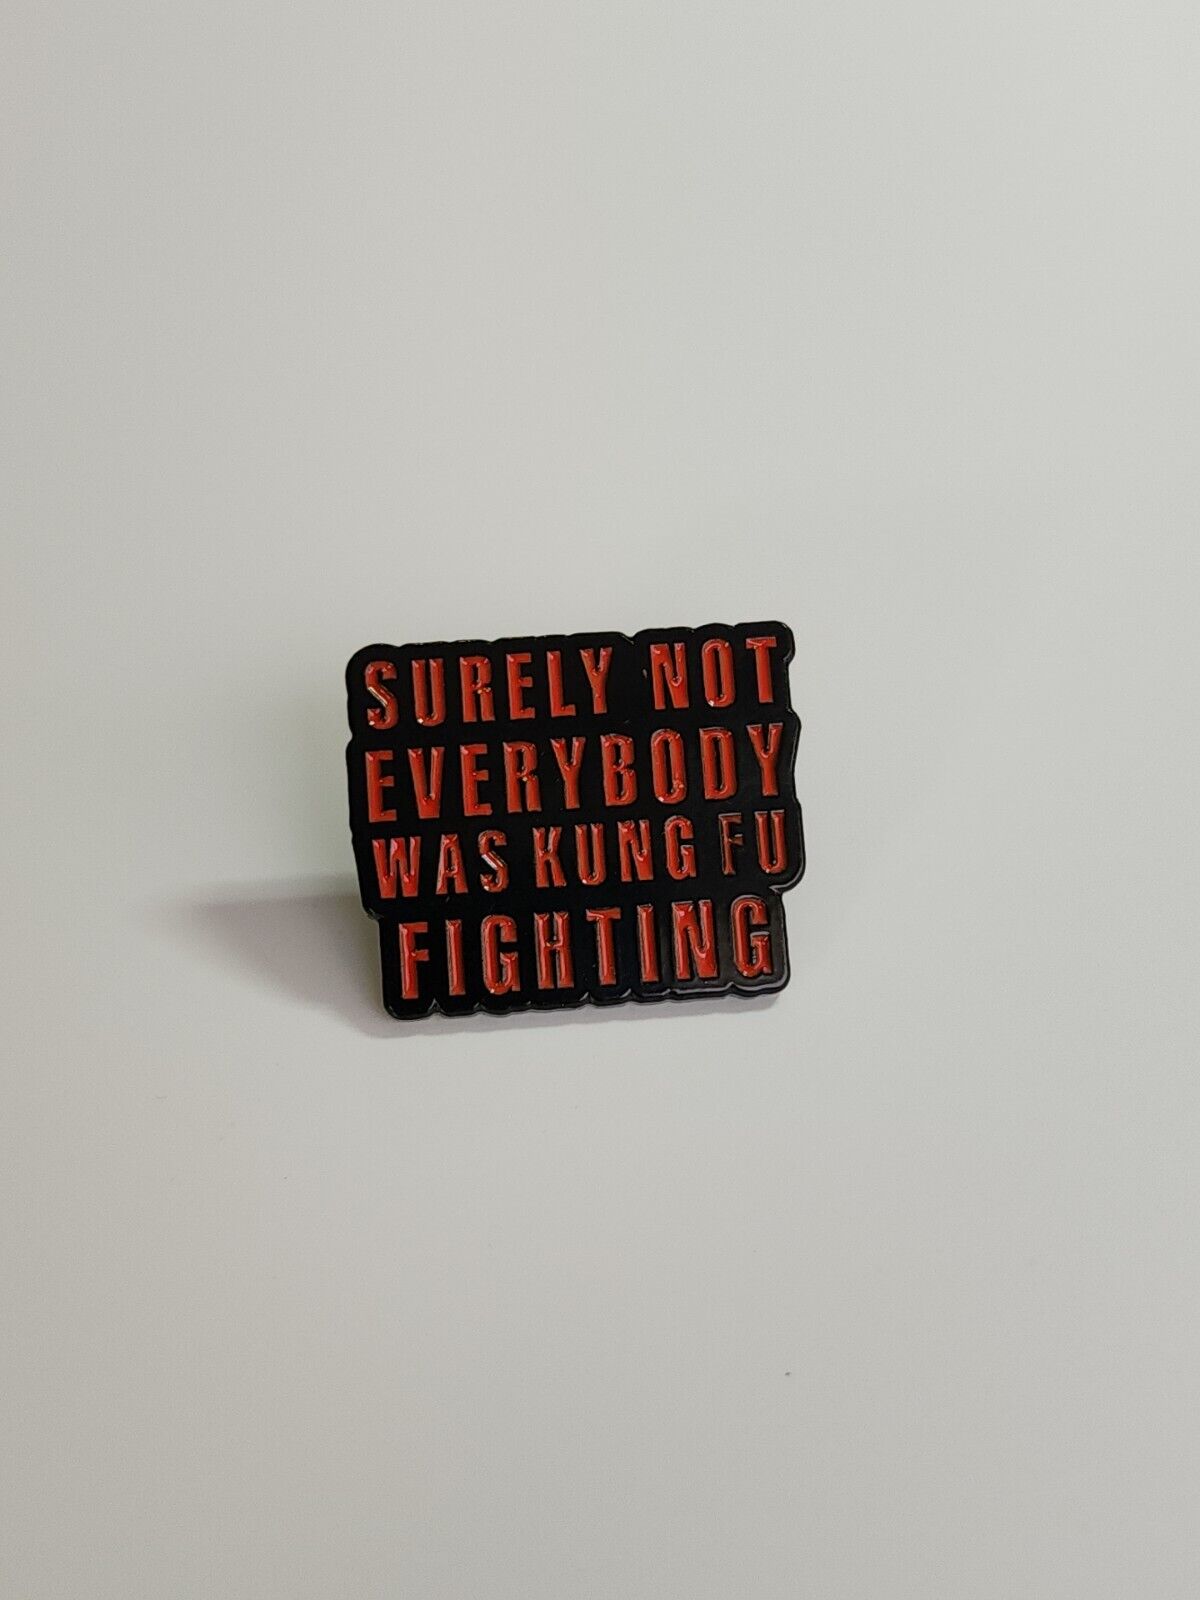 Surely Not Everyone Was Kung Fu Fighting Lapel Pin 